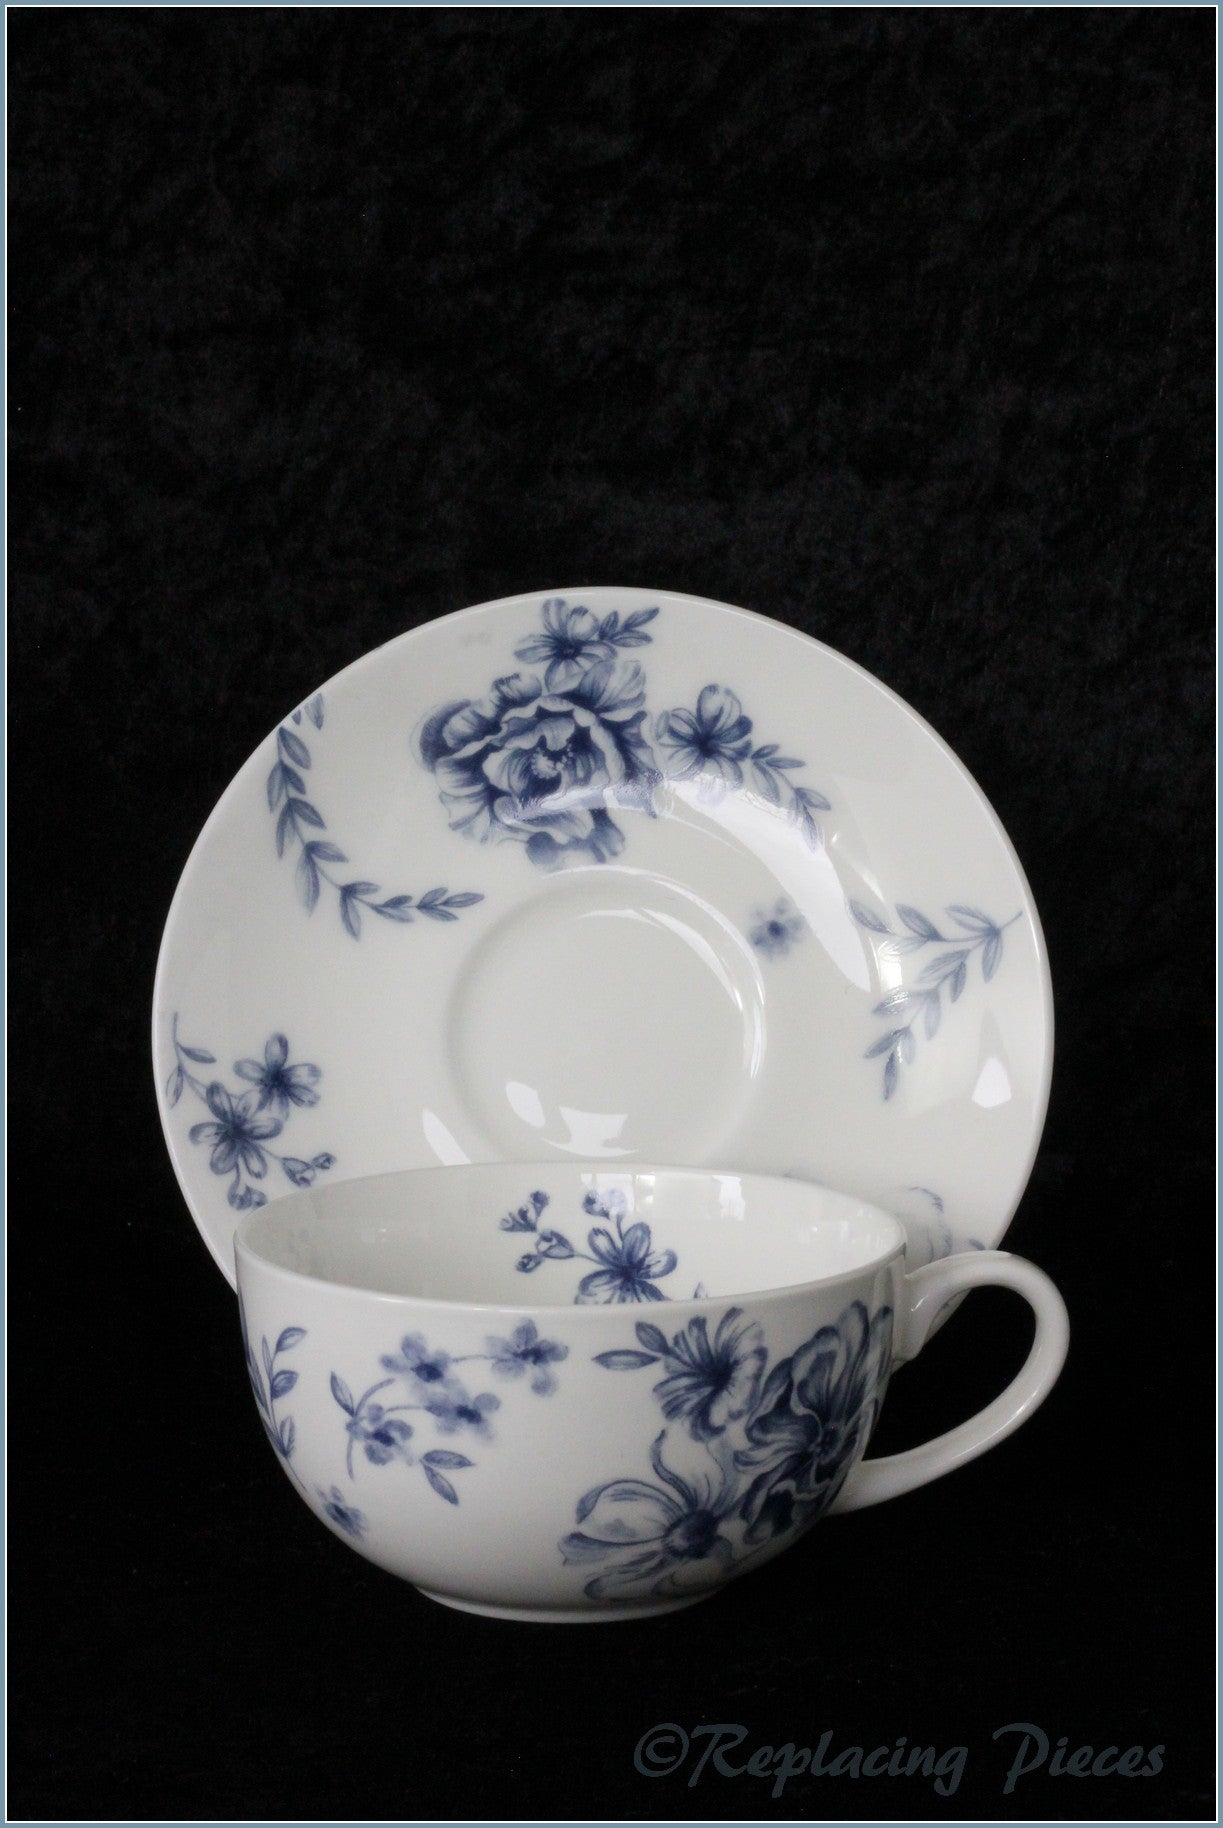 RPW1 - Amanda Griffiths Breakfast Cup & Saucer